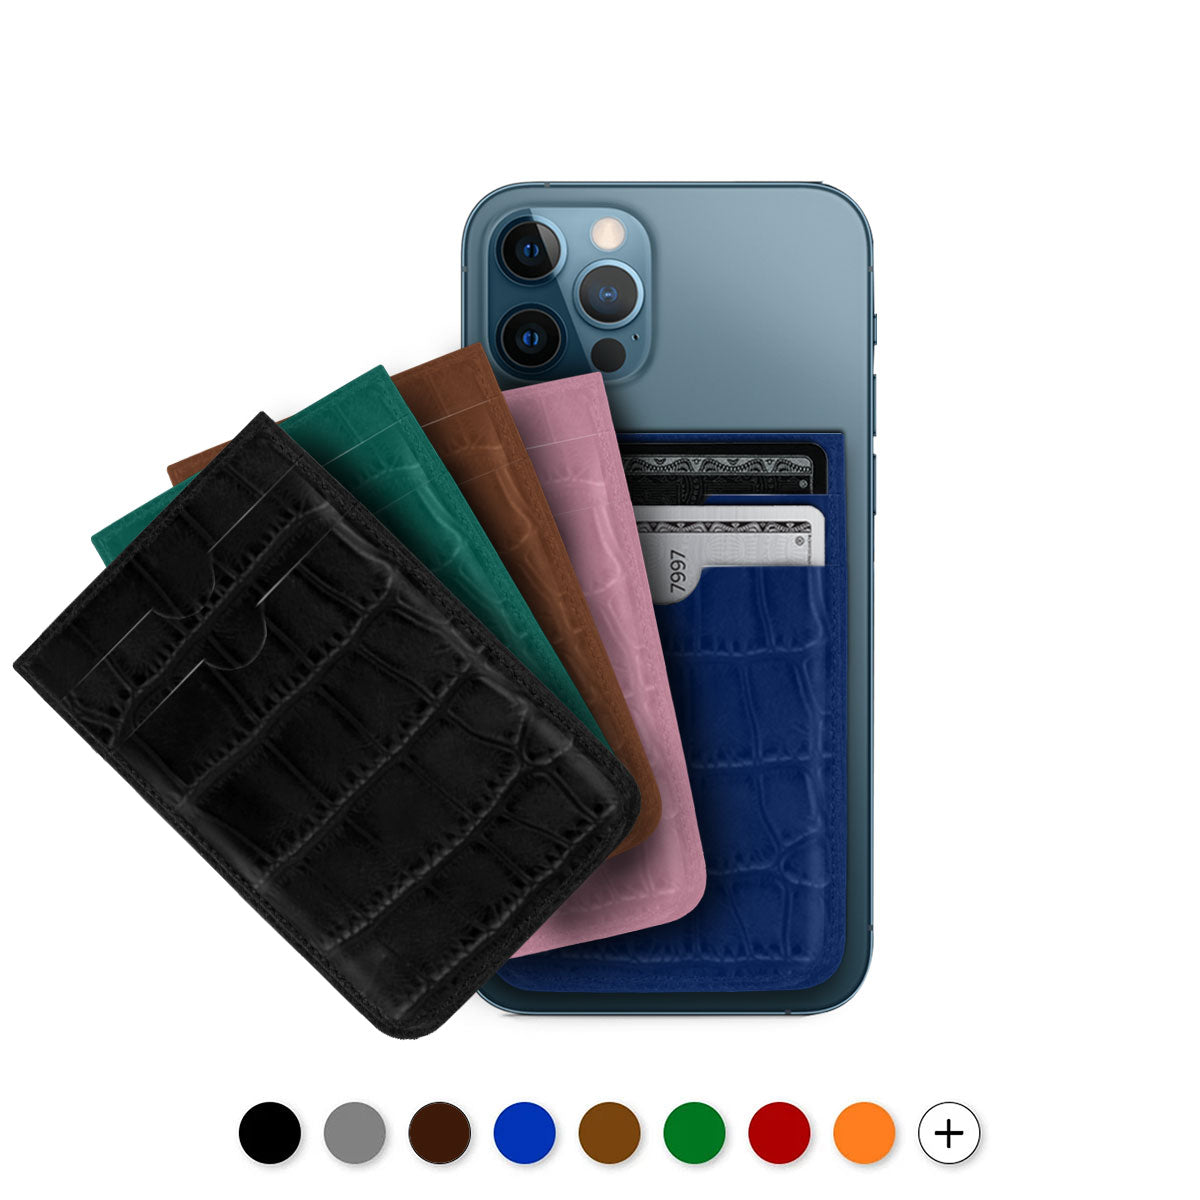 Wallet / credit card case with Magsafe for iPhone 14 and 13 (Pro, Pro Max) - Genuine alligator